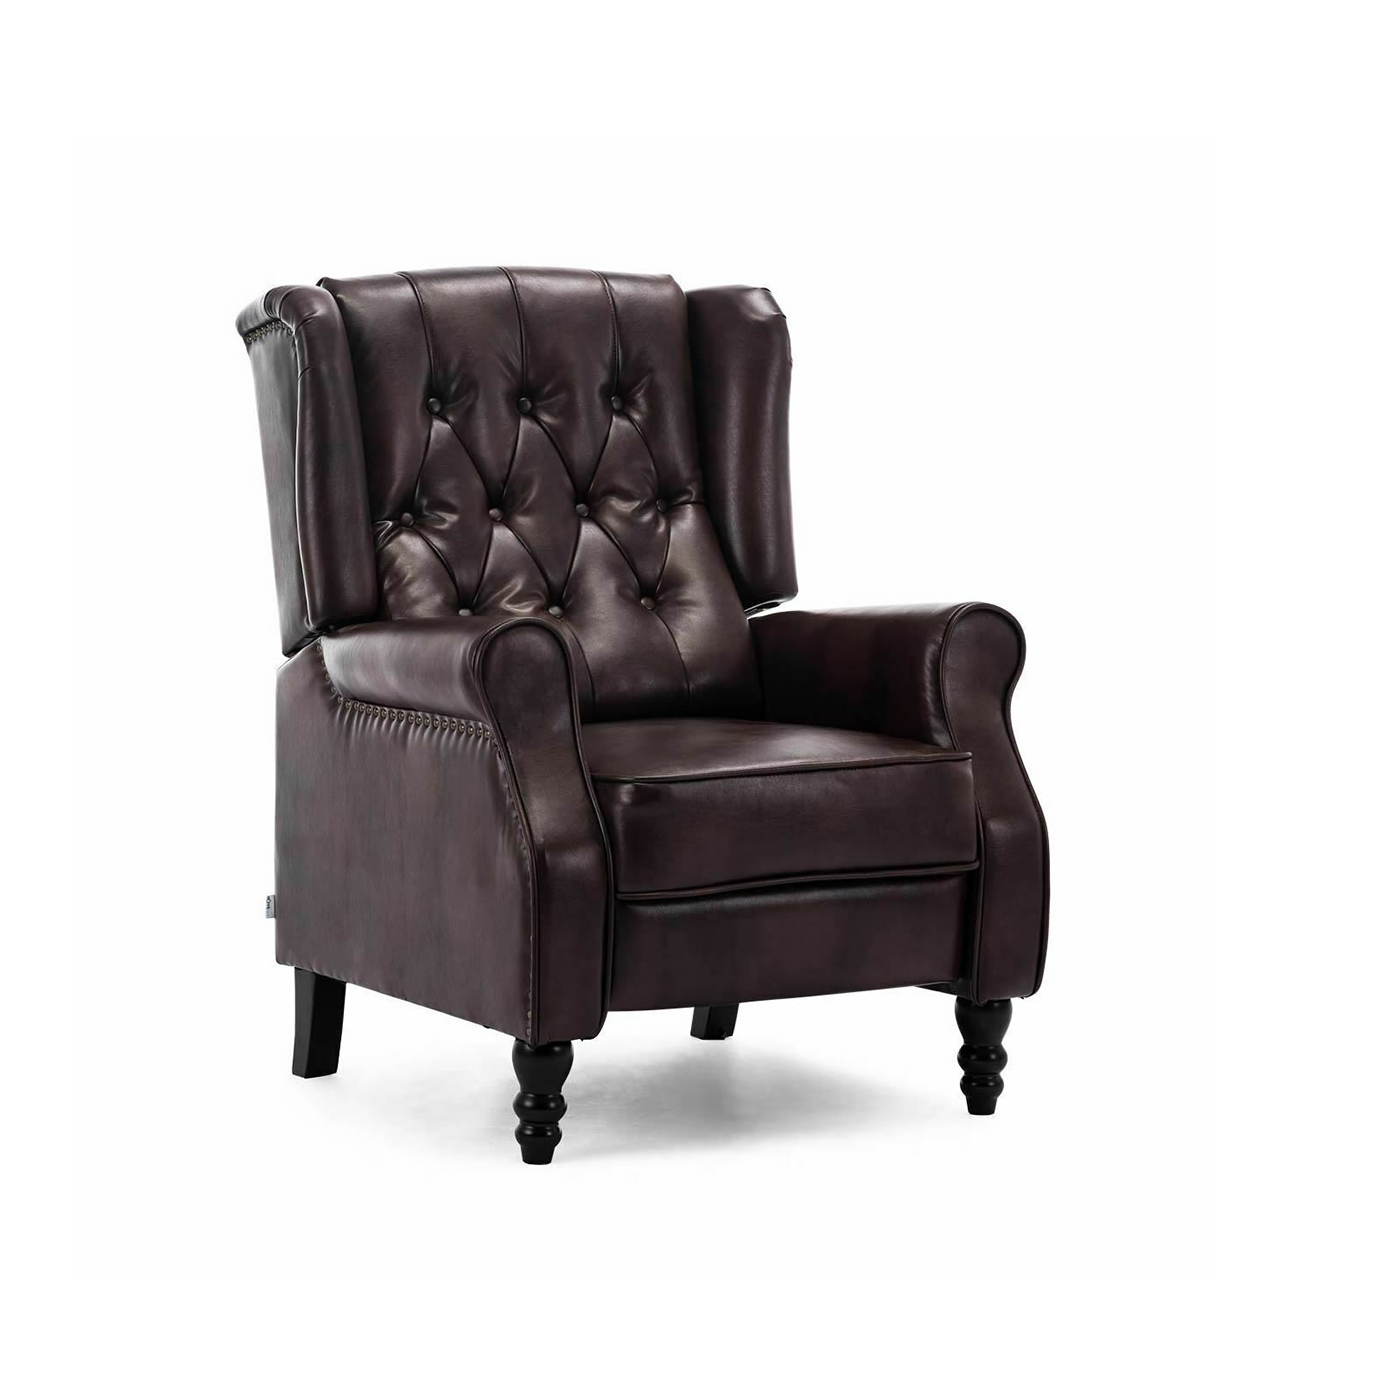 Pushback Leather Wingback Recliner, Leather Wingback Chair Recliner